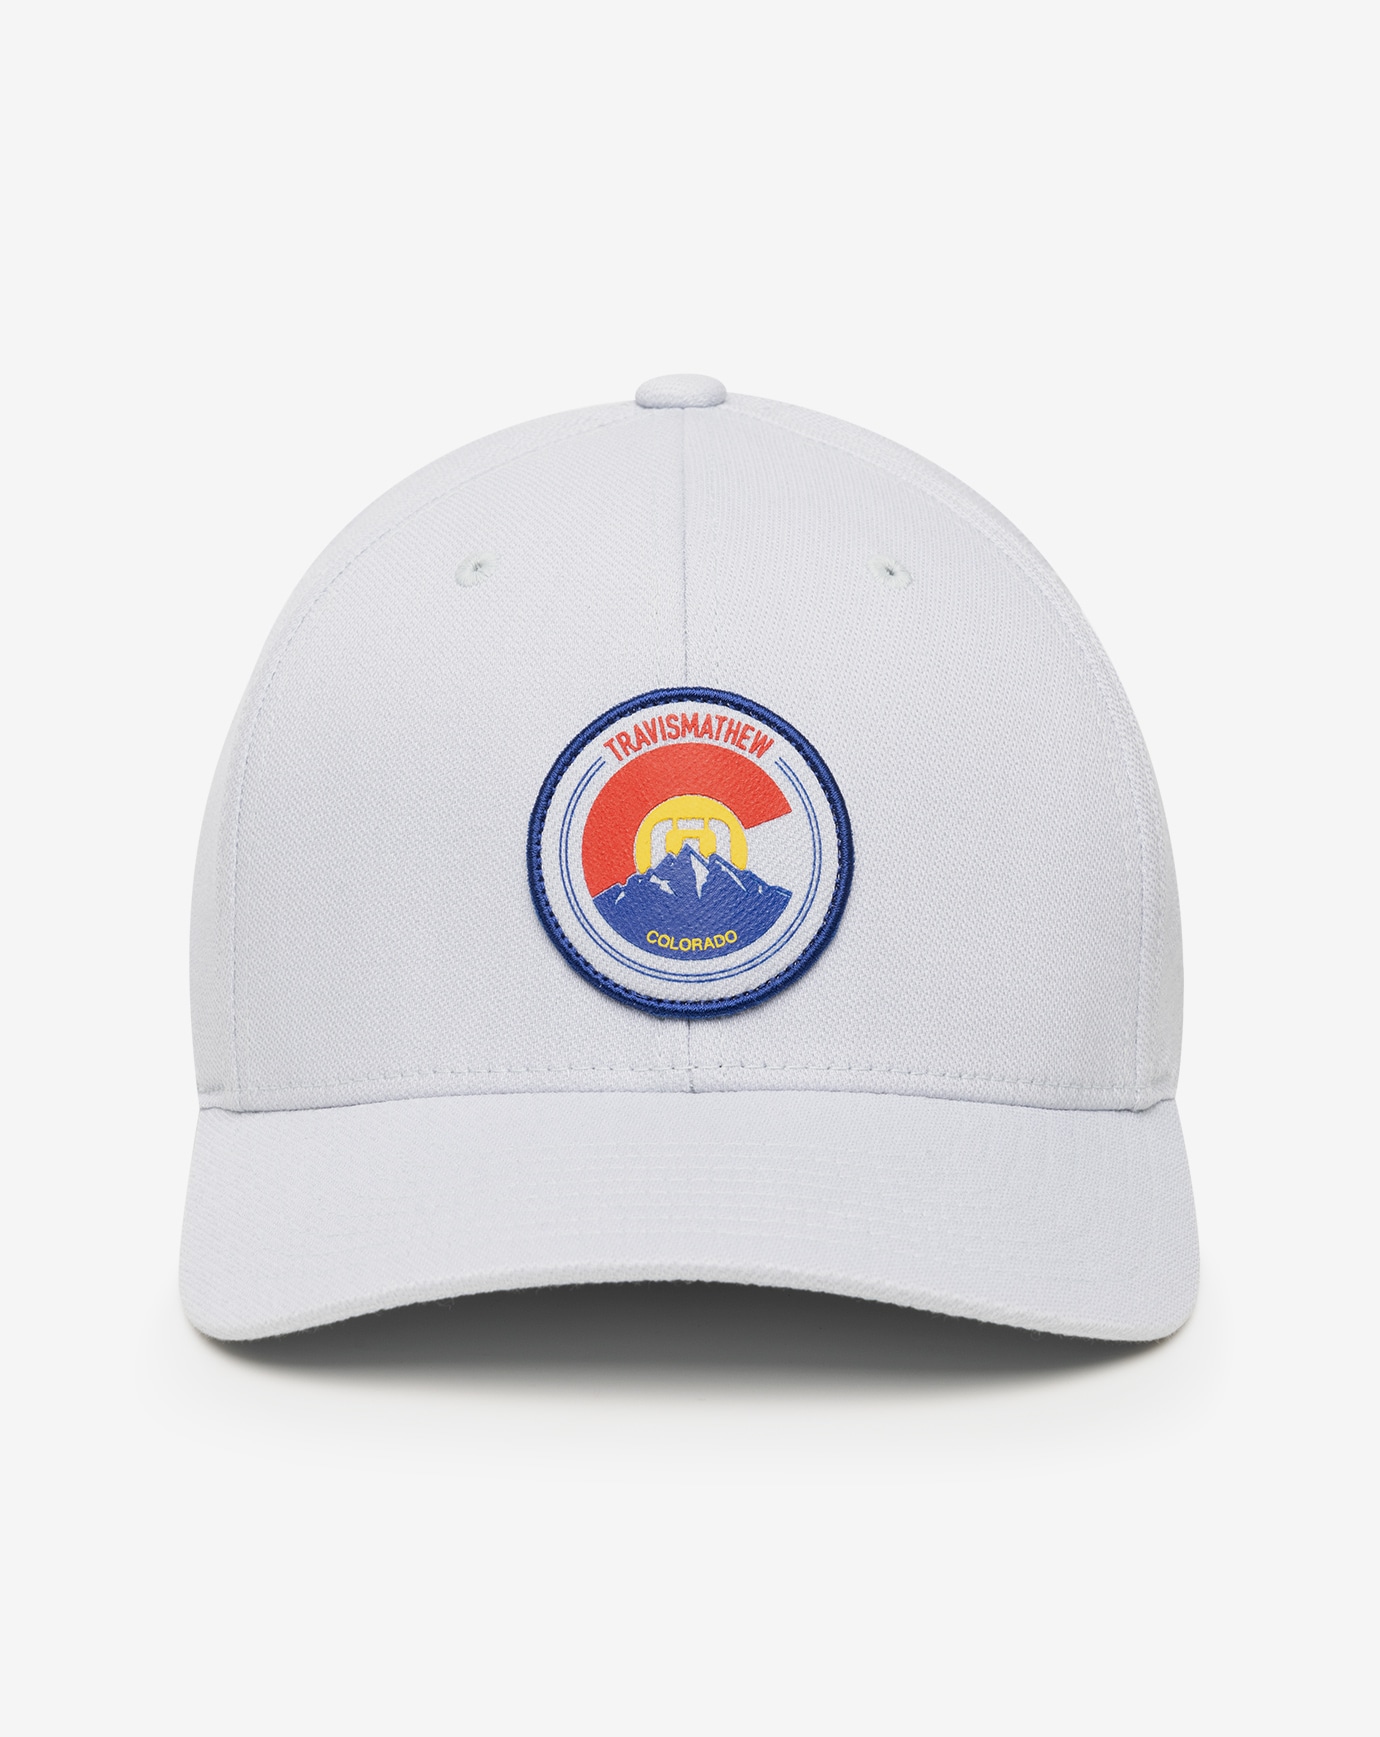 Related Product - ALL THE POWDER FITTED HAT